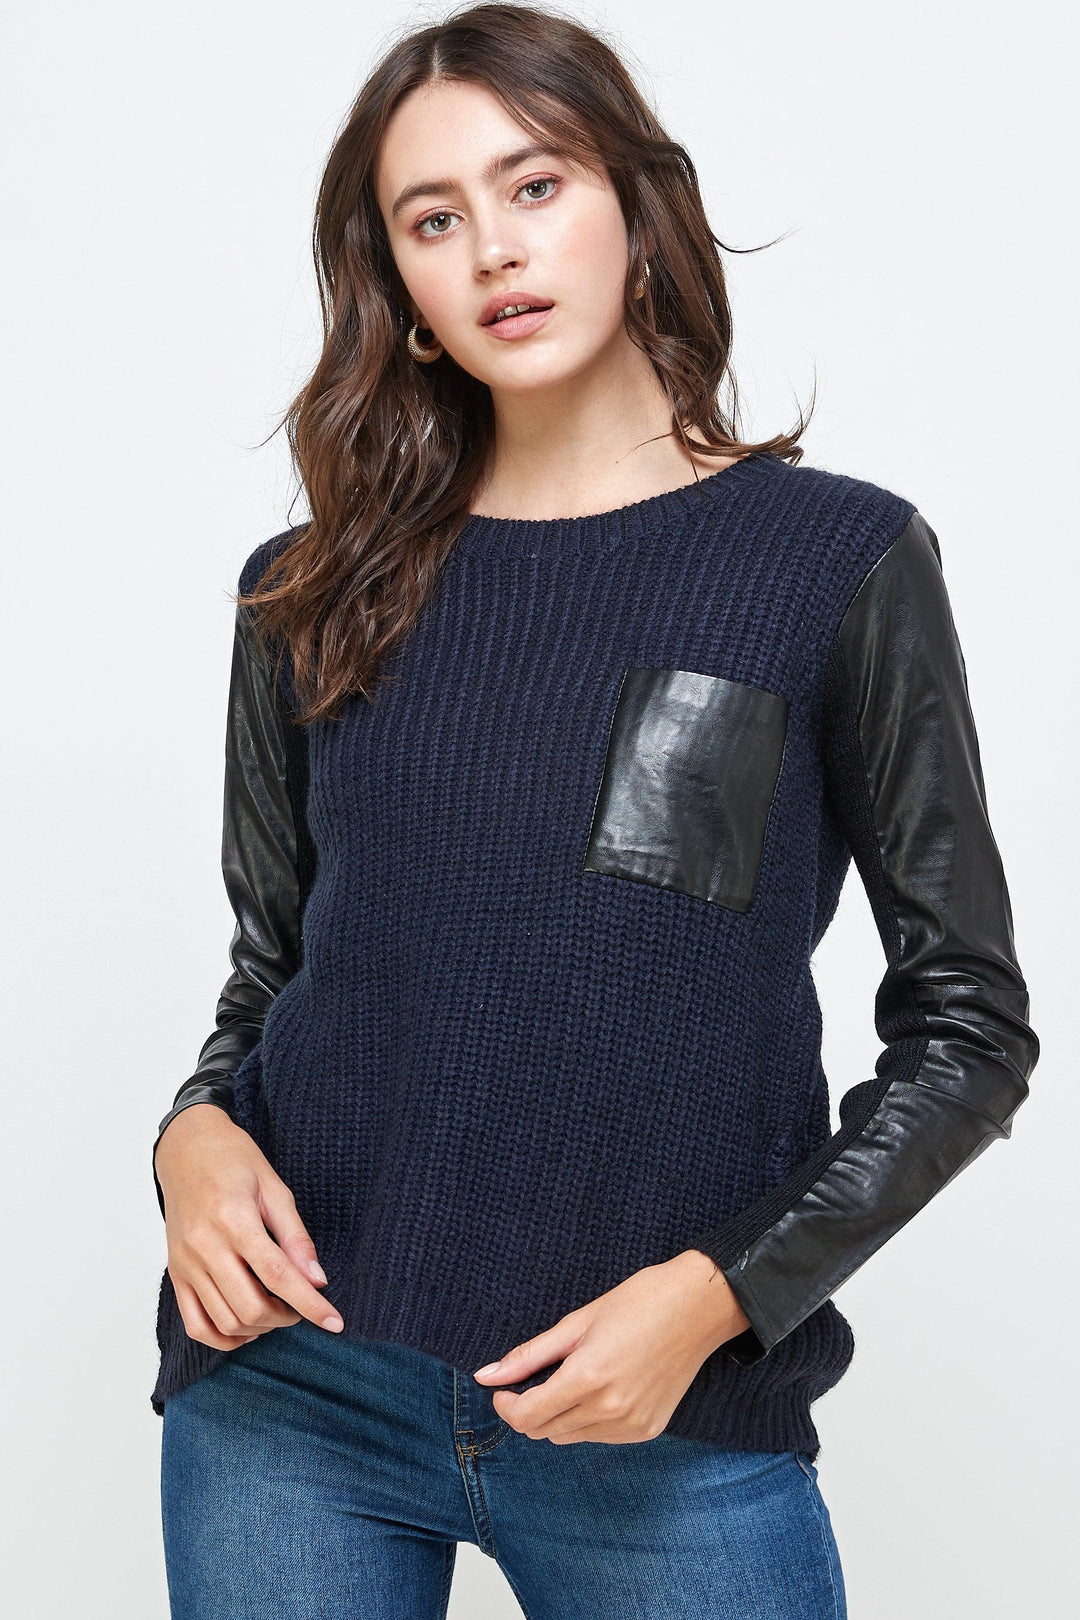 Vegan Leather Sweater High Low Top - Brand My Case